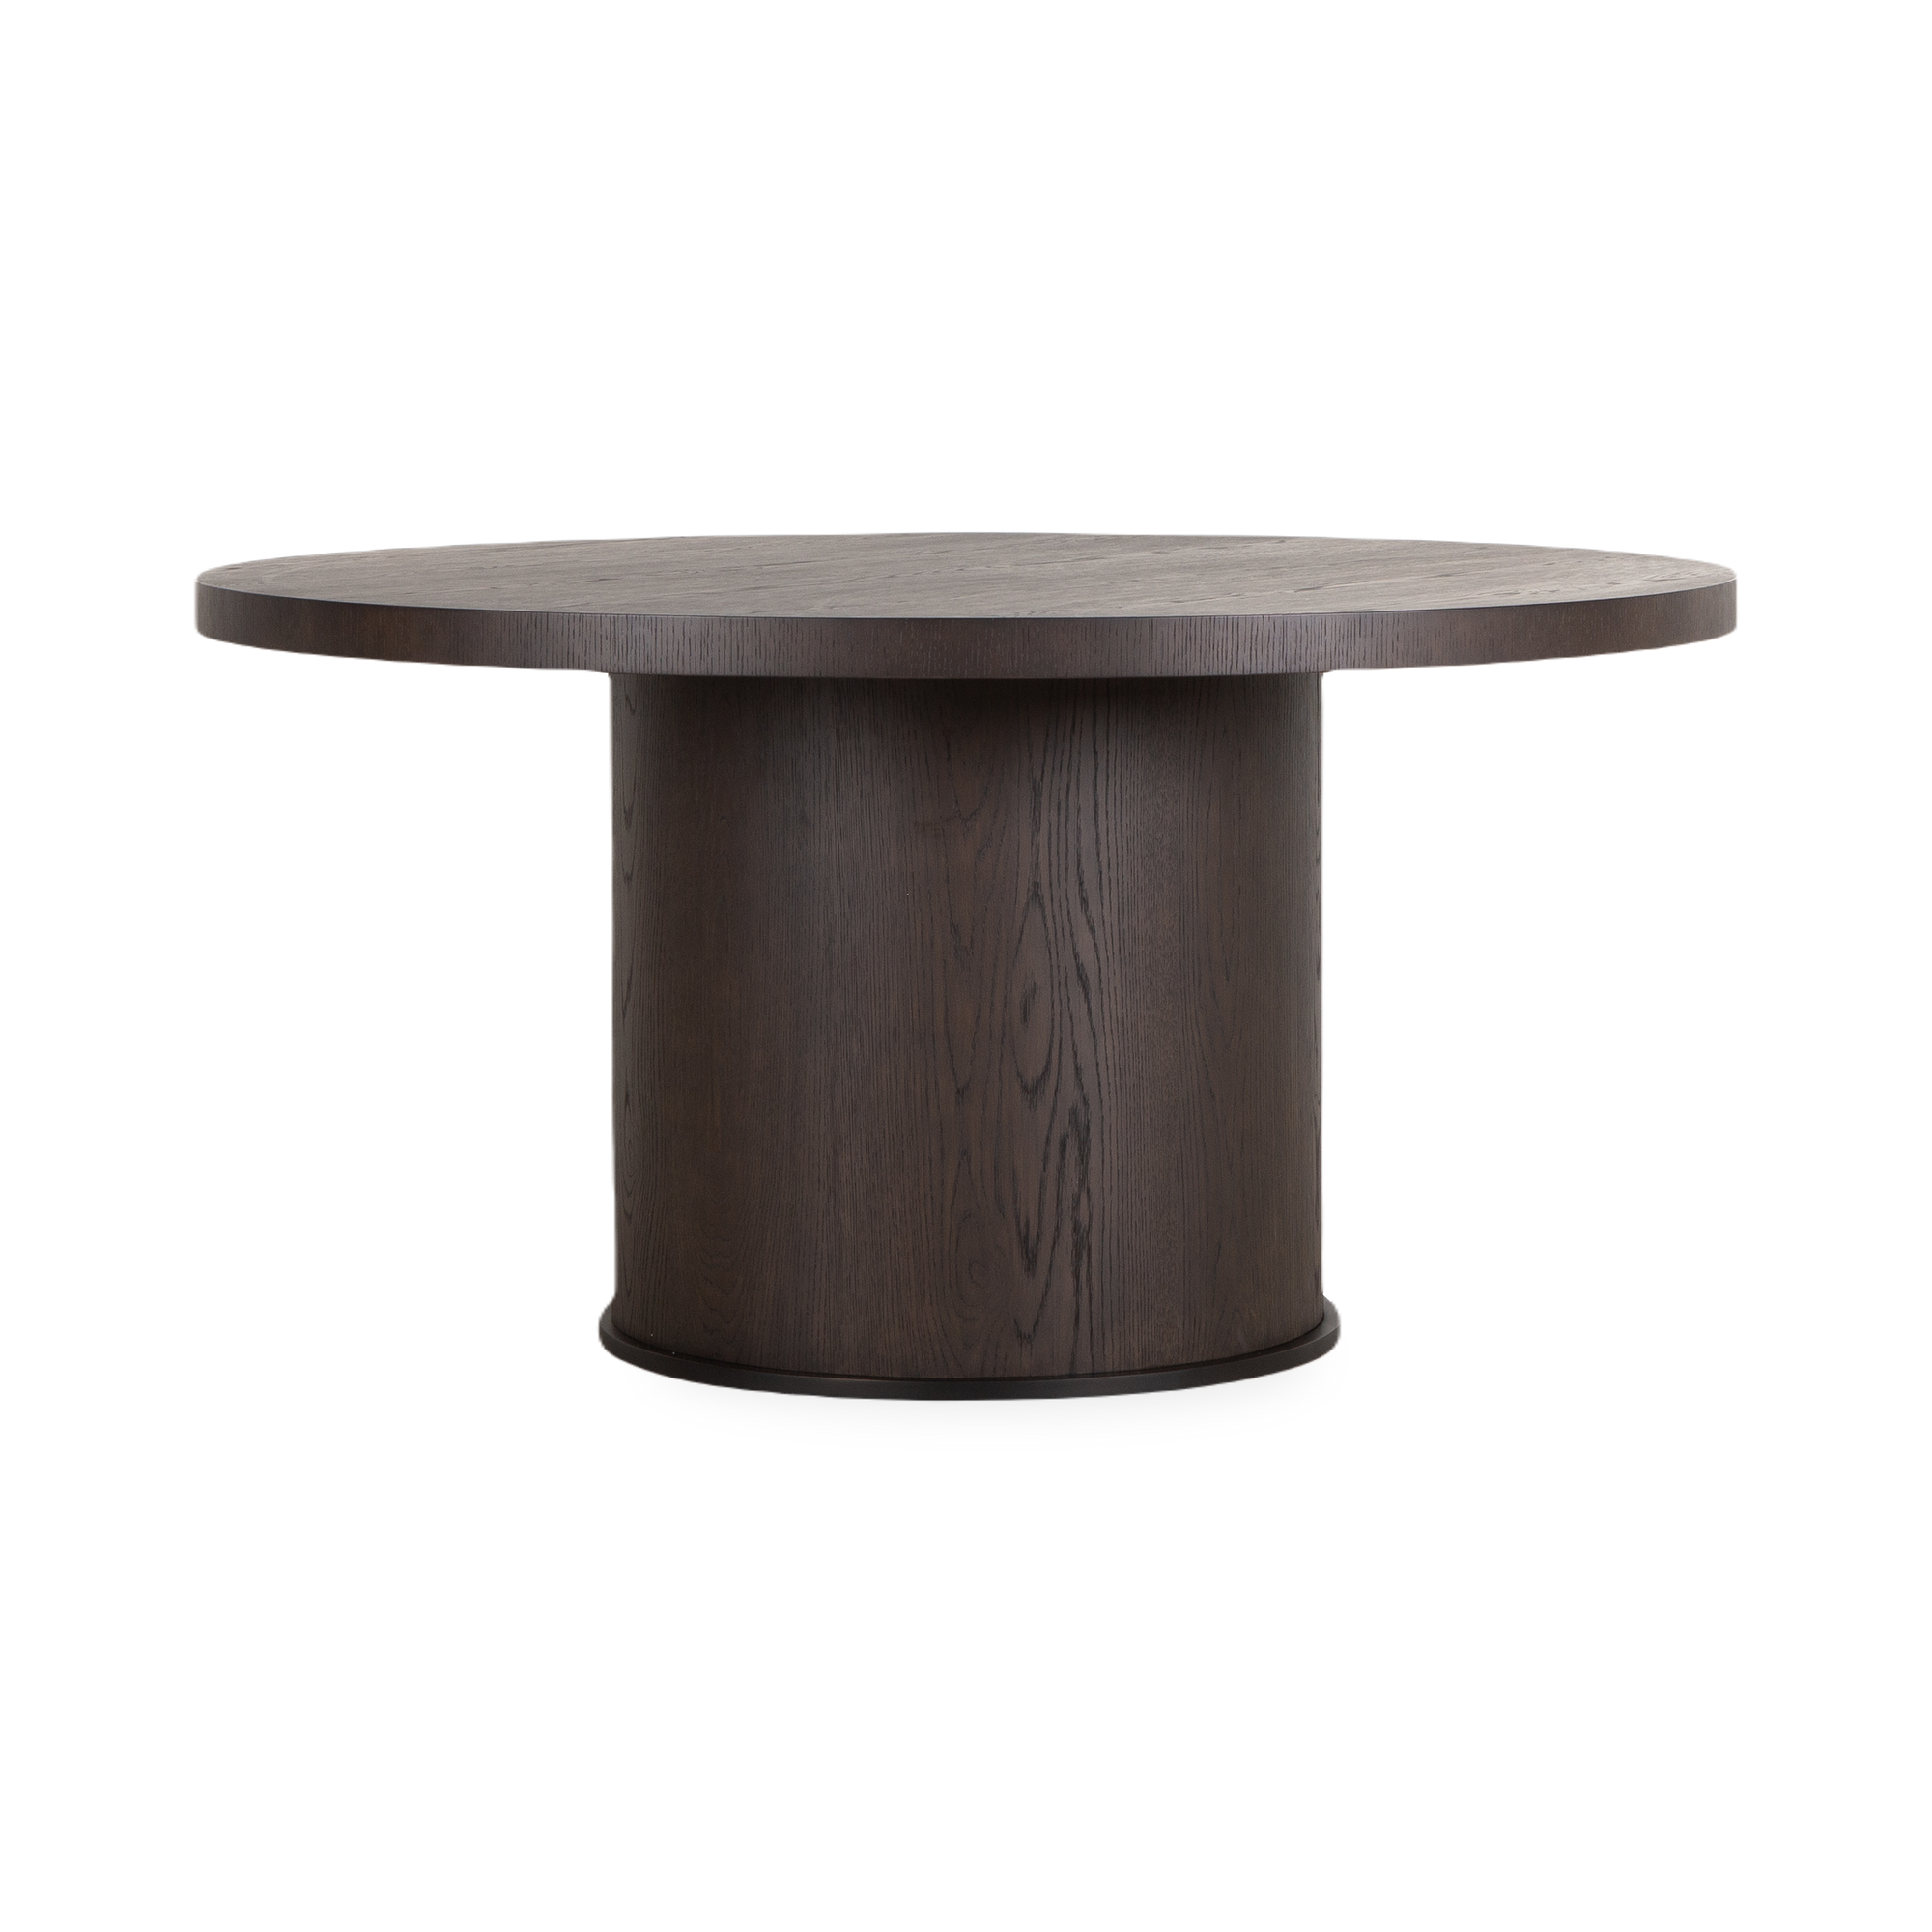 With bold, rectilinear lines and strong proportions, the Altar Round Dining Table is a celebration of the timeless beauty of pure geometry.